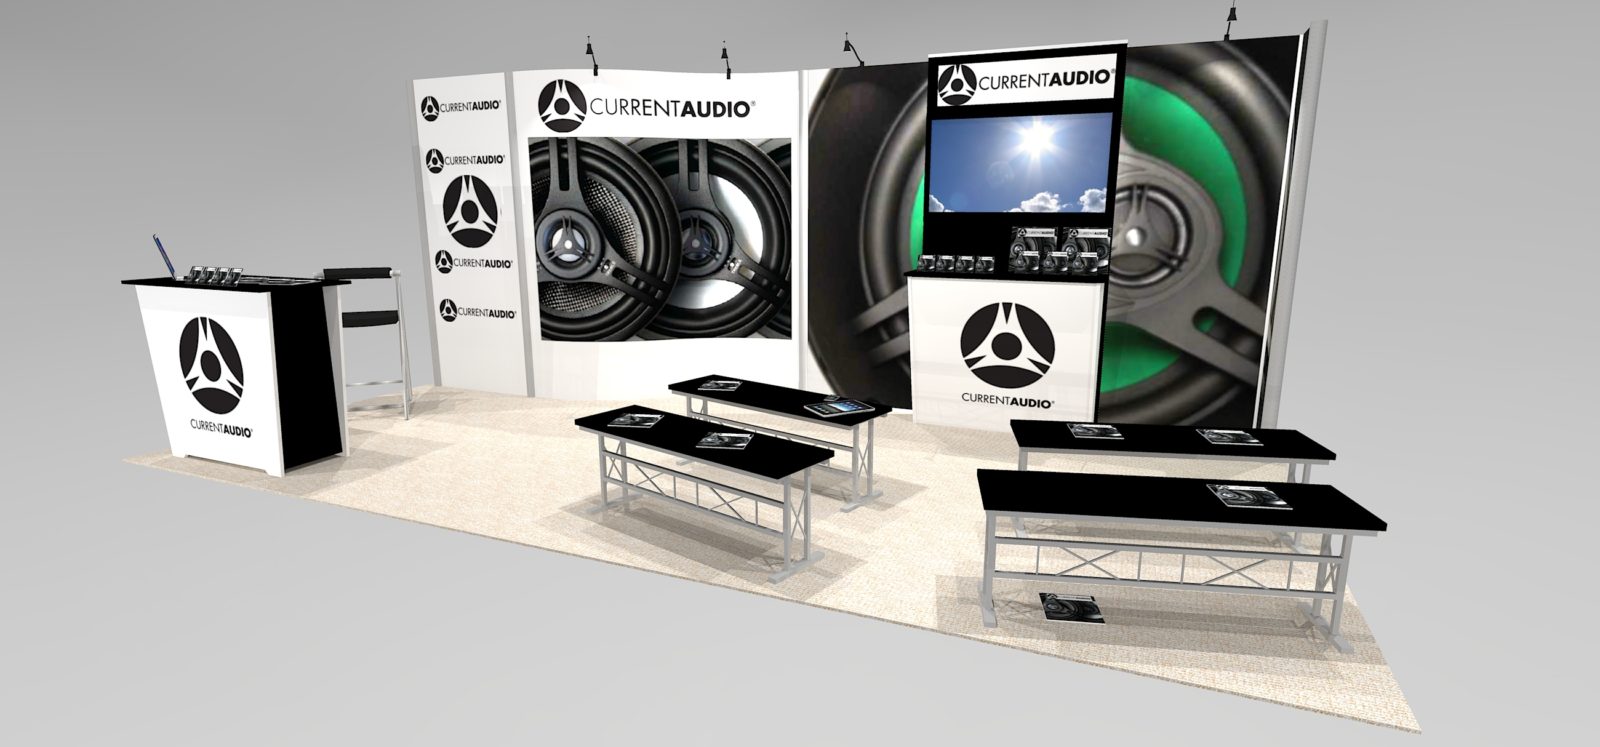 New 20 trade show design with large flat screen and storage